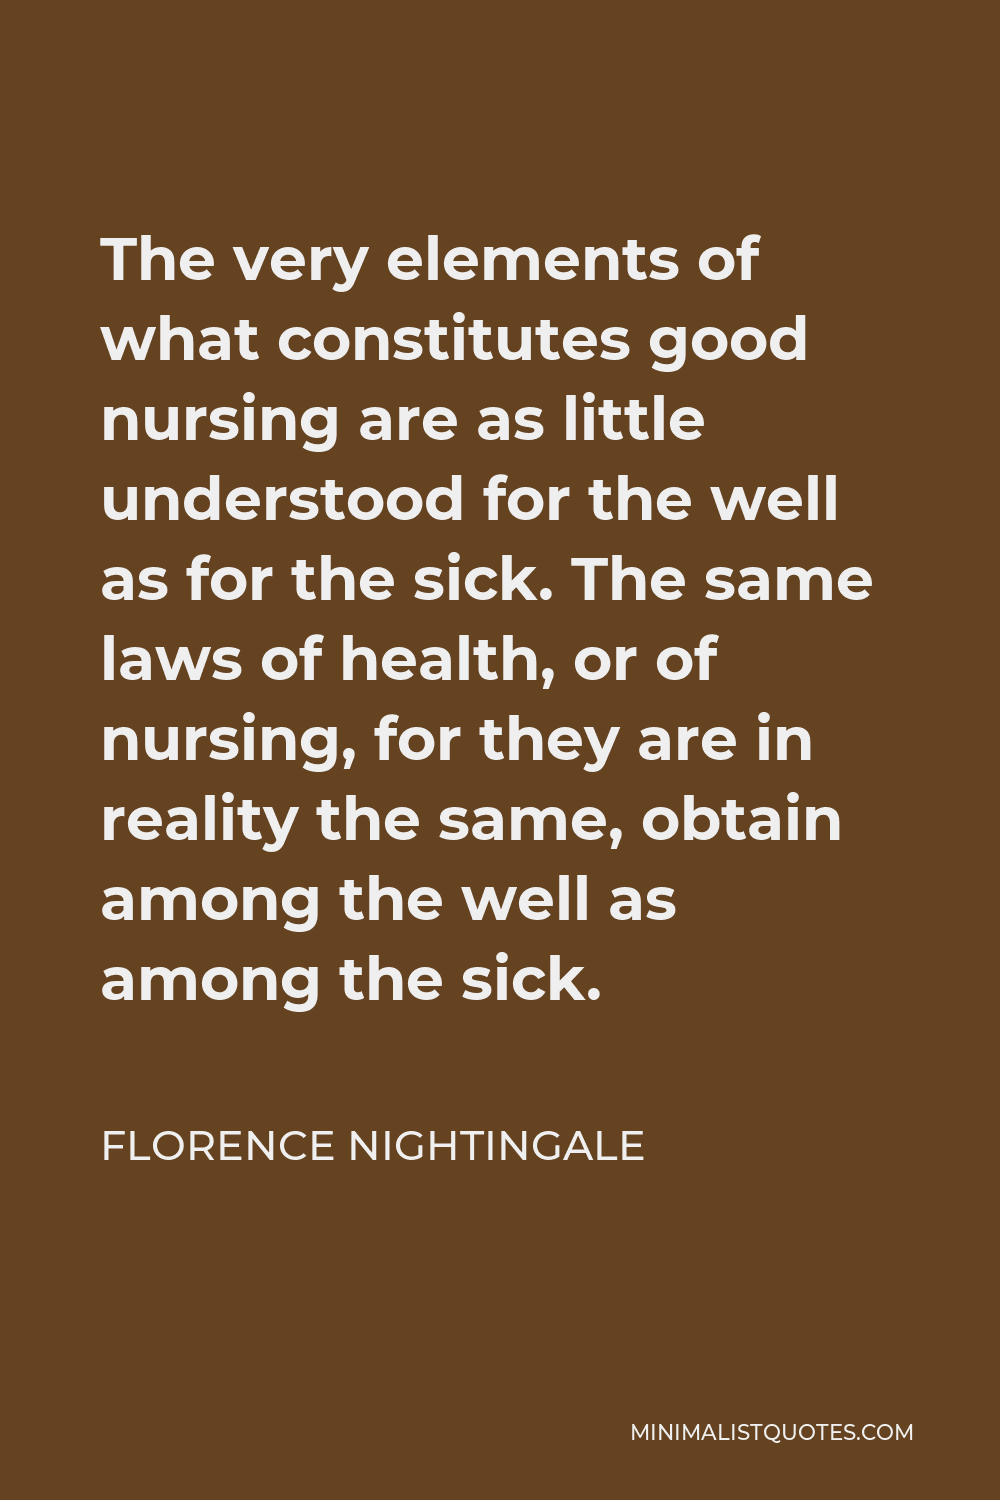 Florence Nightingale Quote - The very elements of what constitutes good nursing are as little understood for the well as for the sick. The same laws of health, or of nursing, for they are in reality the same, obtain among the well as among the sick.